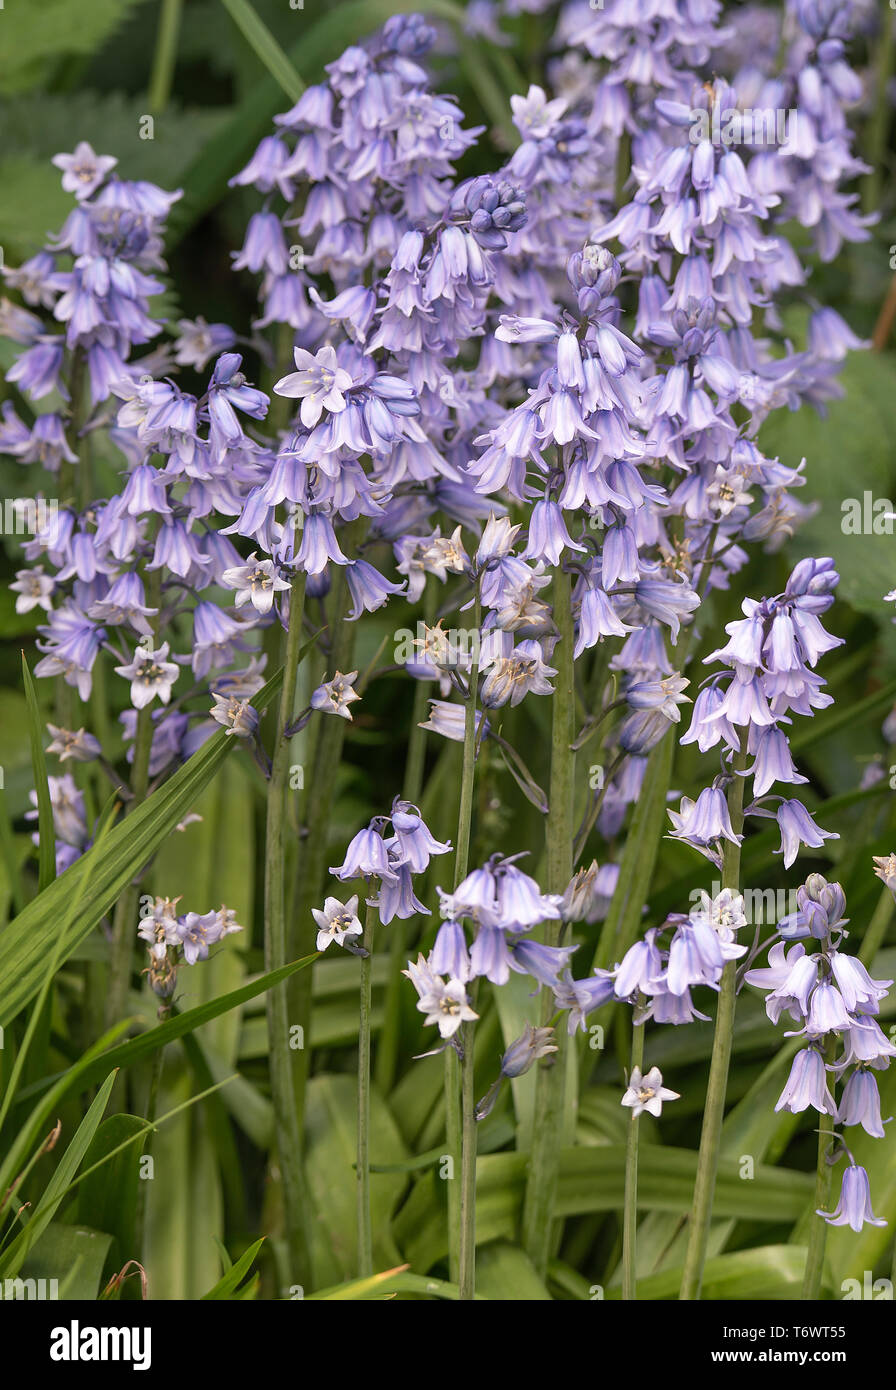 Clusters of Spanish Bluebell Flowers in Full Bloom in a Garden in Alsager Cheshire England United Kingdom UK Stock Photo